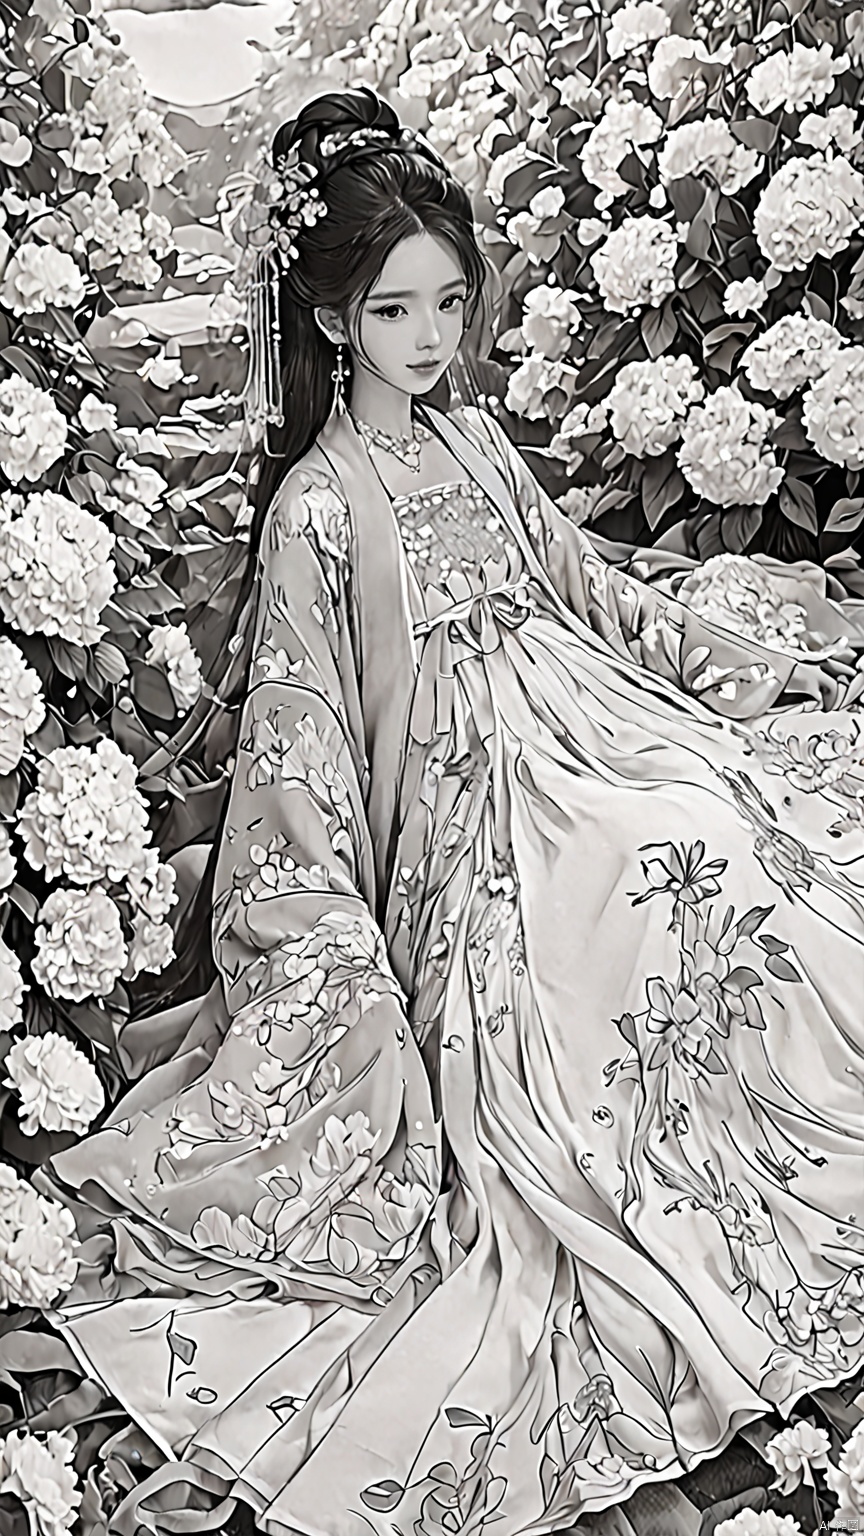  A doll wearing a dress surrounded by flowers and flowers, girl in flowers, extremely fine ink line art, detailed manga style, line art coloring page, black and white coloring, manga style, coloring page, girl made of flowers, complex caricature drawing, exquisite line art, detailed line art, ink caricature drawing, manga illustration, covered with flowers